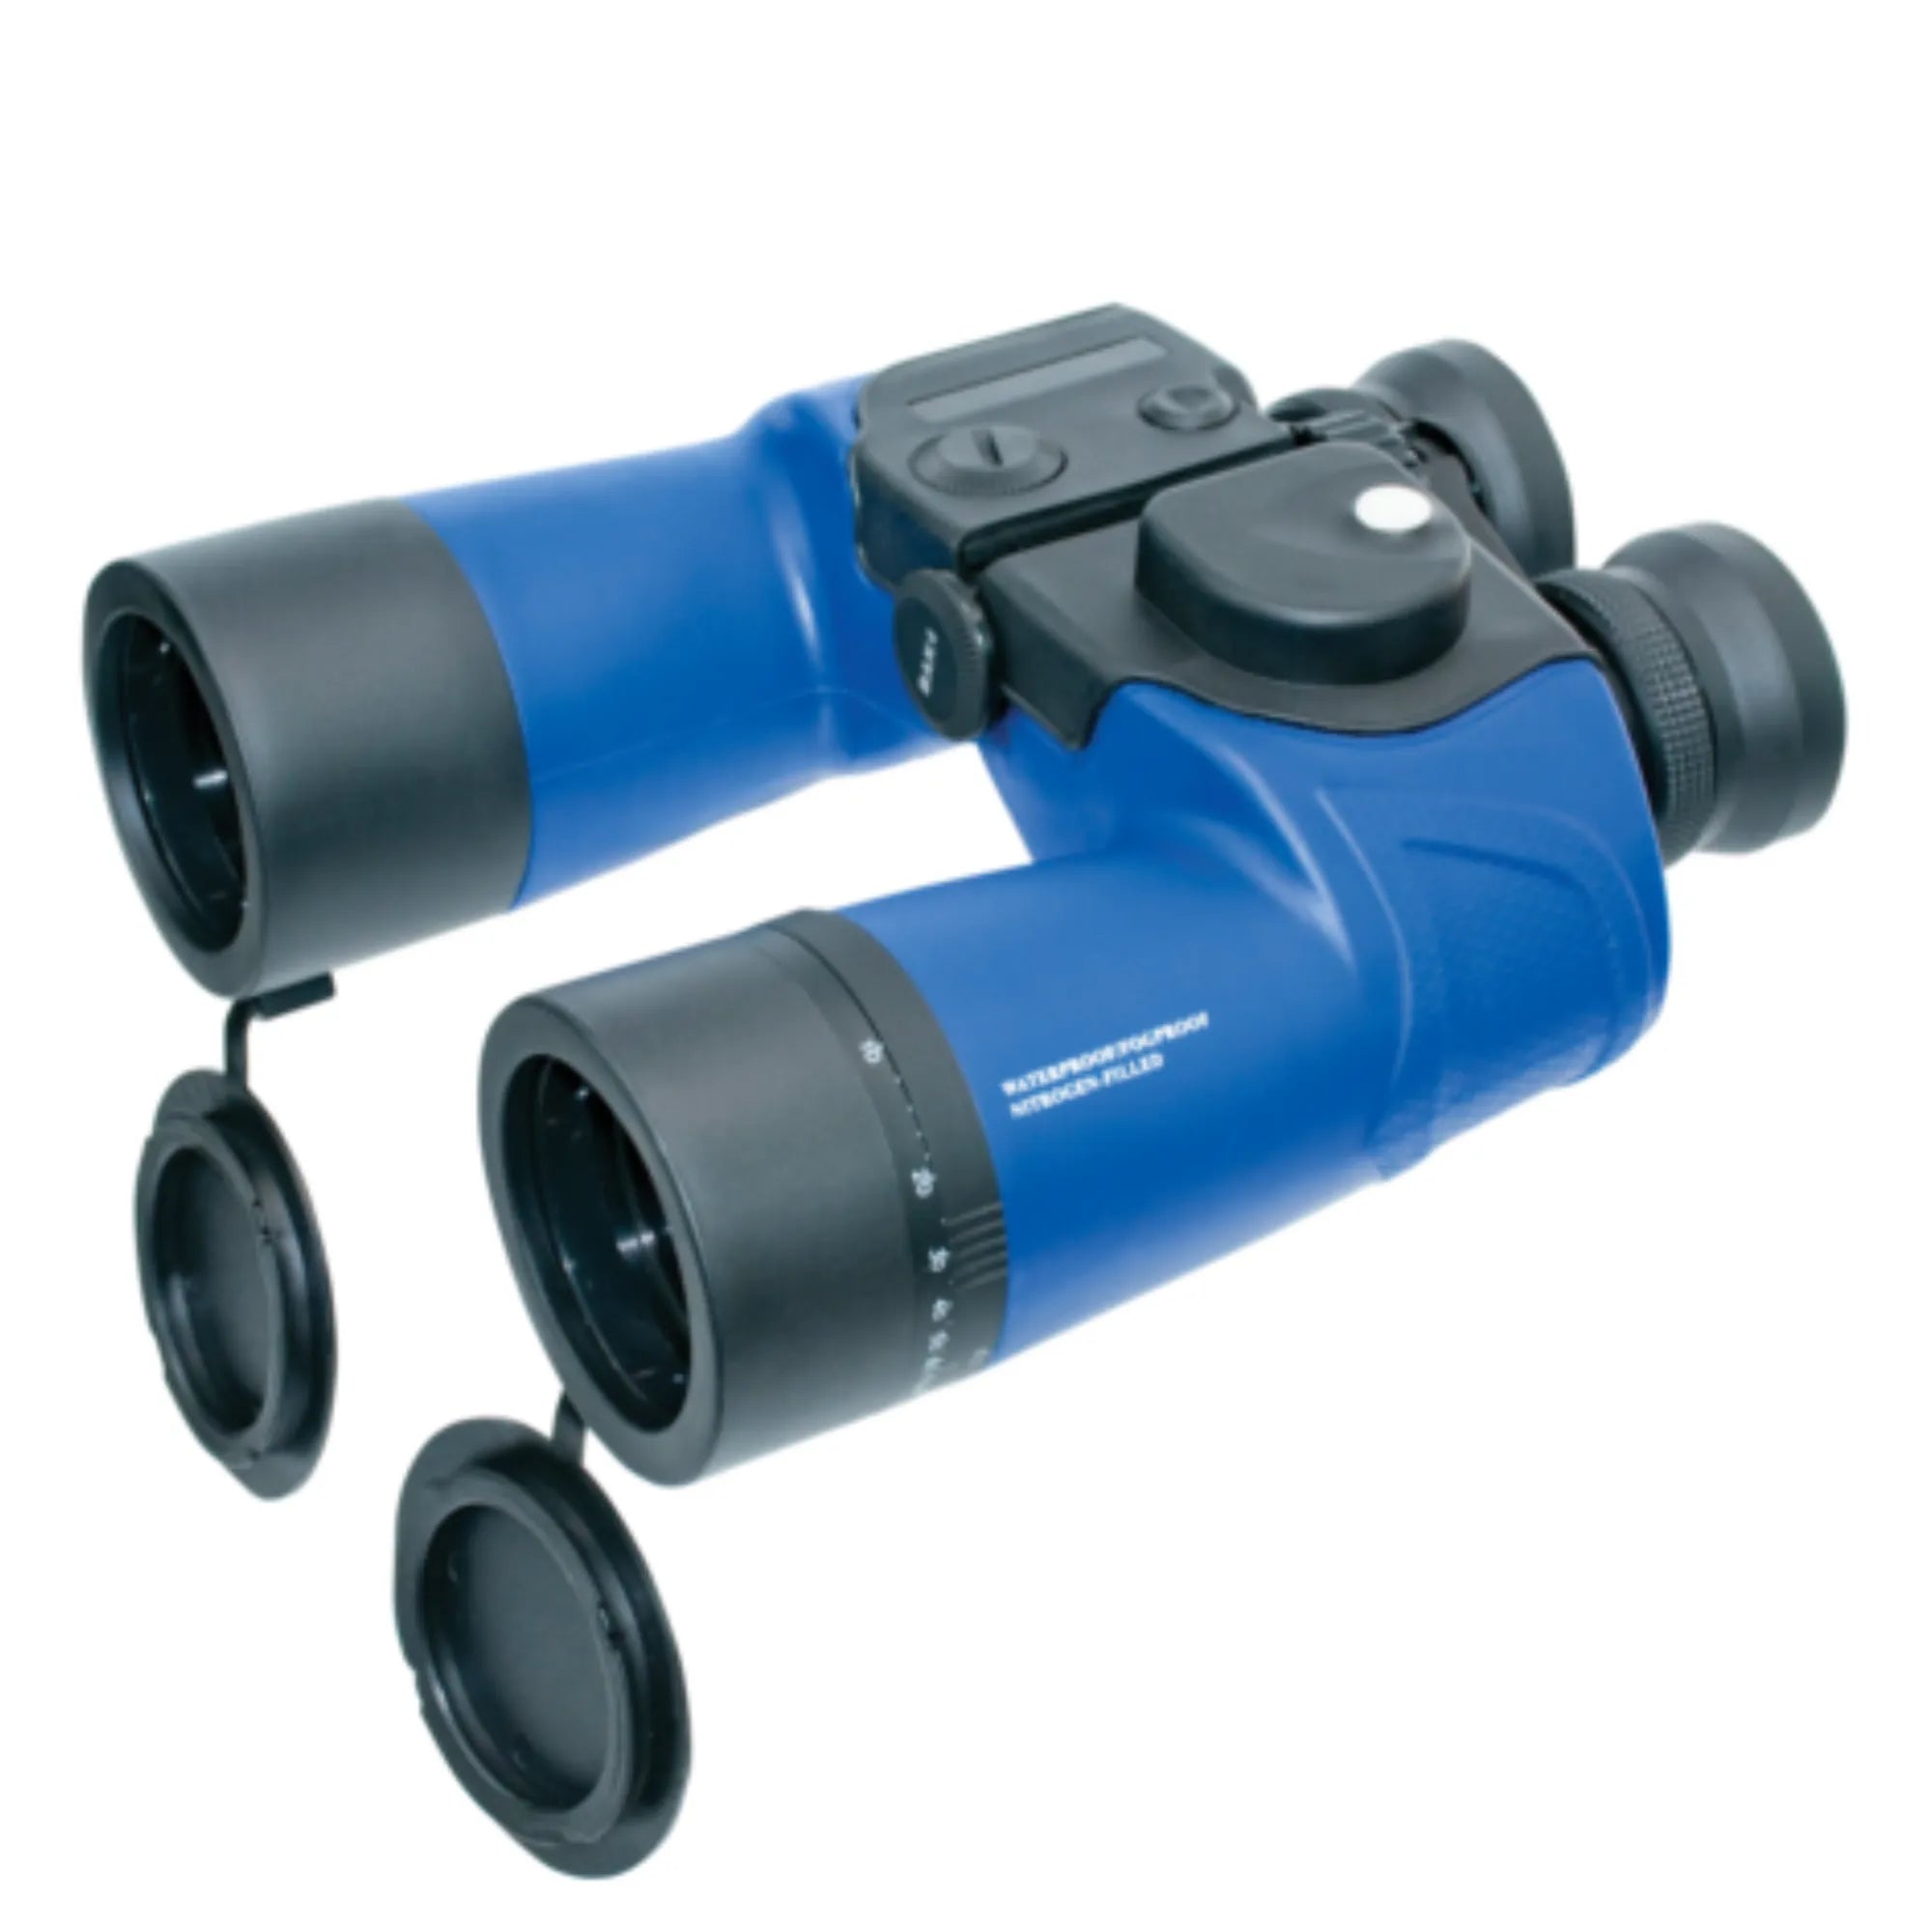 7 x 50 Central Focus Binoculars with Compass